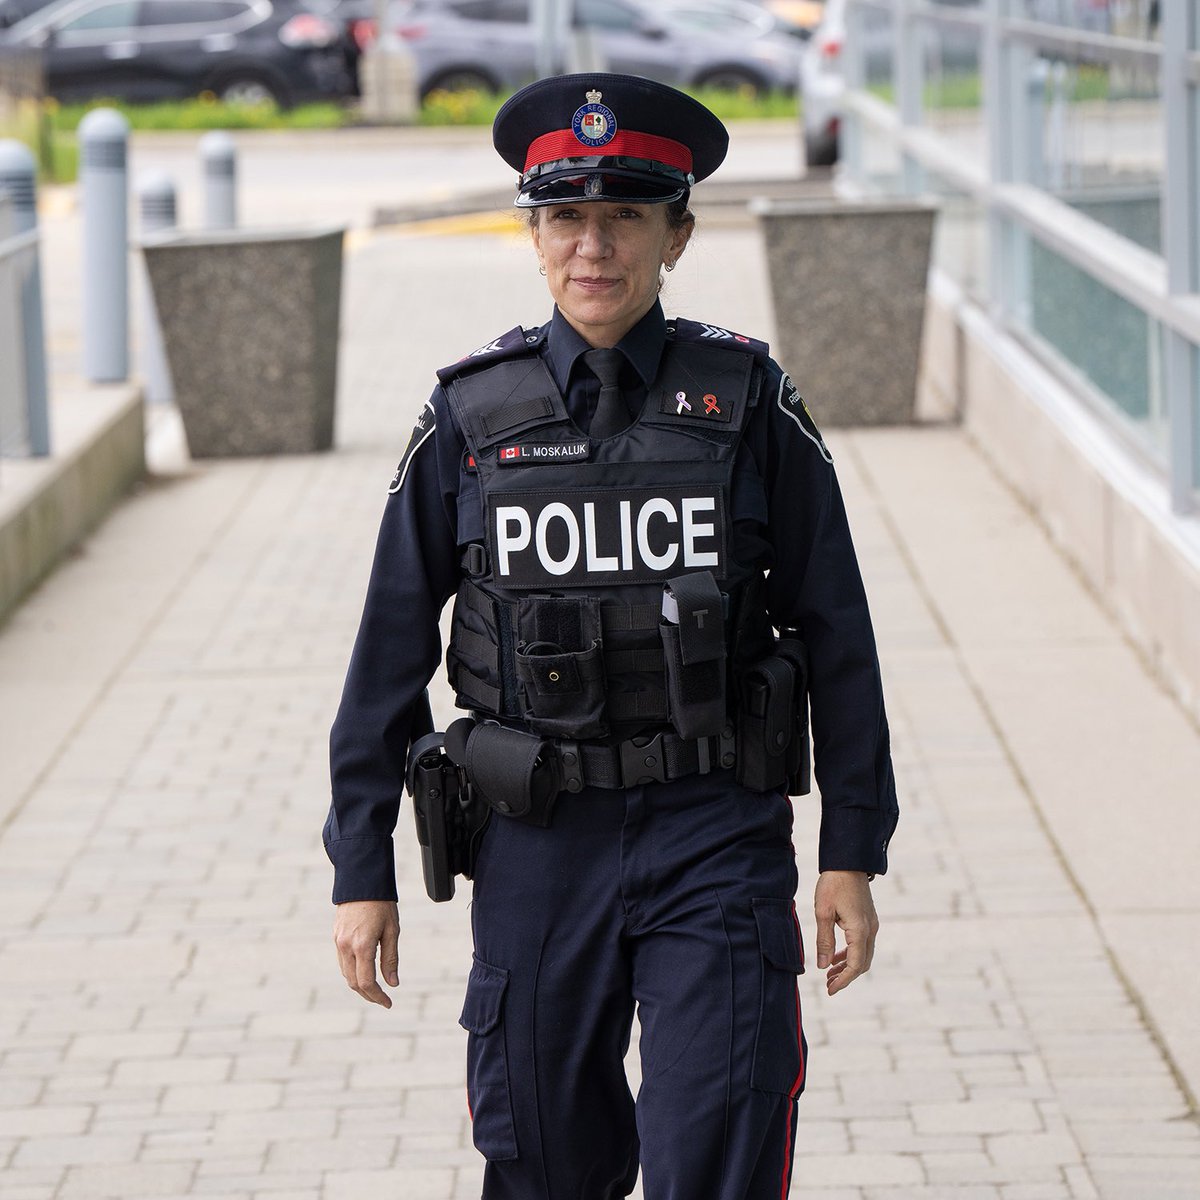 Mothers are at the heart of families and the heart of @YRP. Thanks to all the moms putting in a shift to keep their communities safe on #MothersDay. #DeedsSpeak #YorkRegionalPolice #YRP